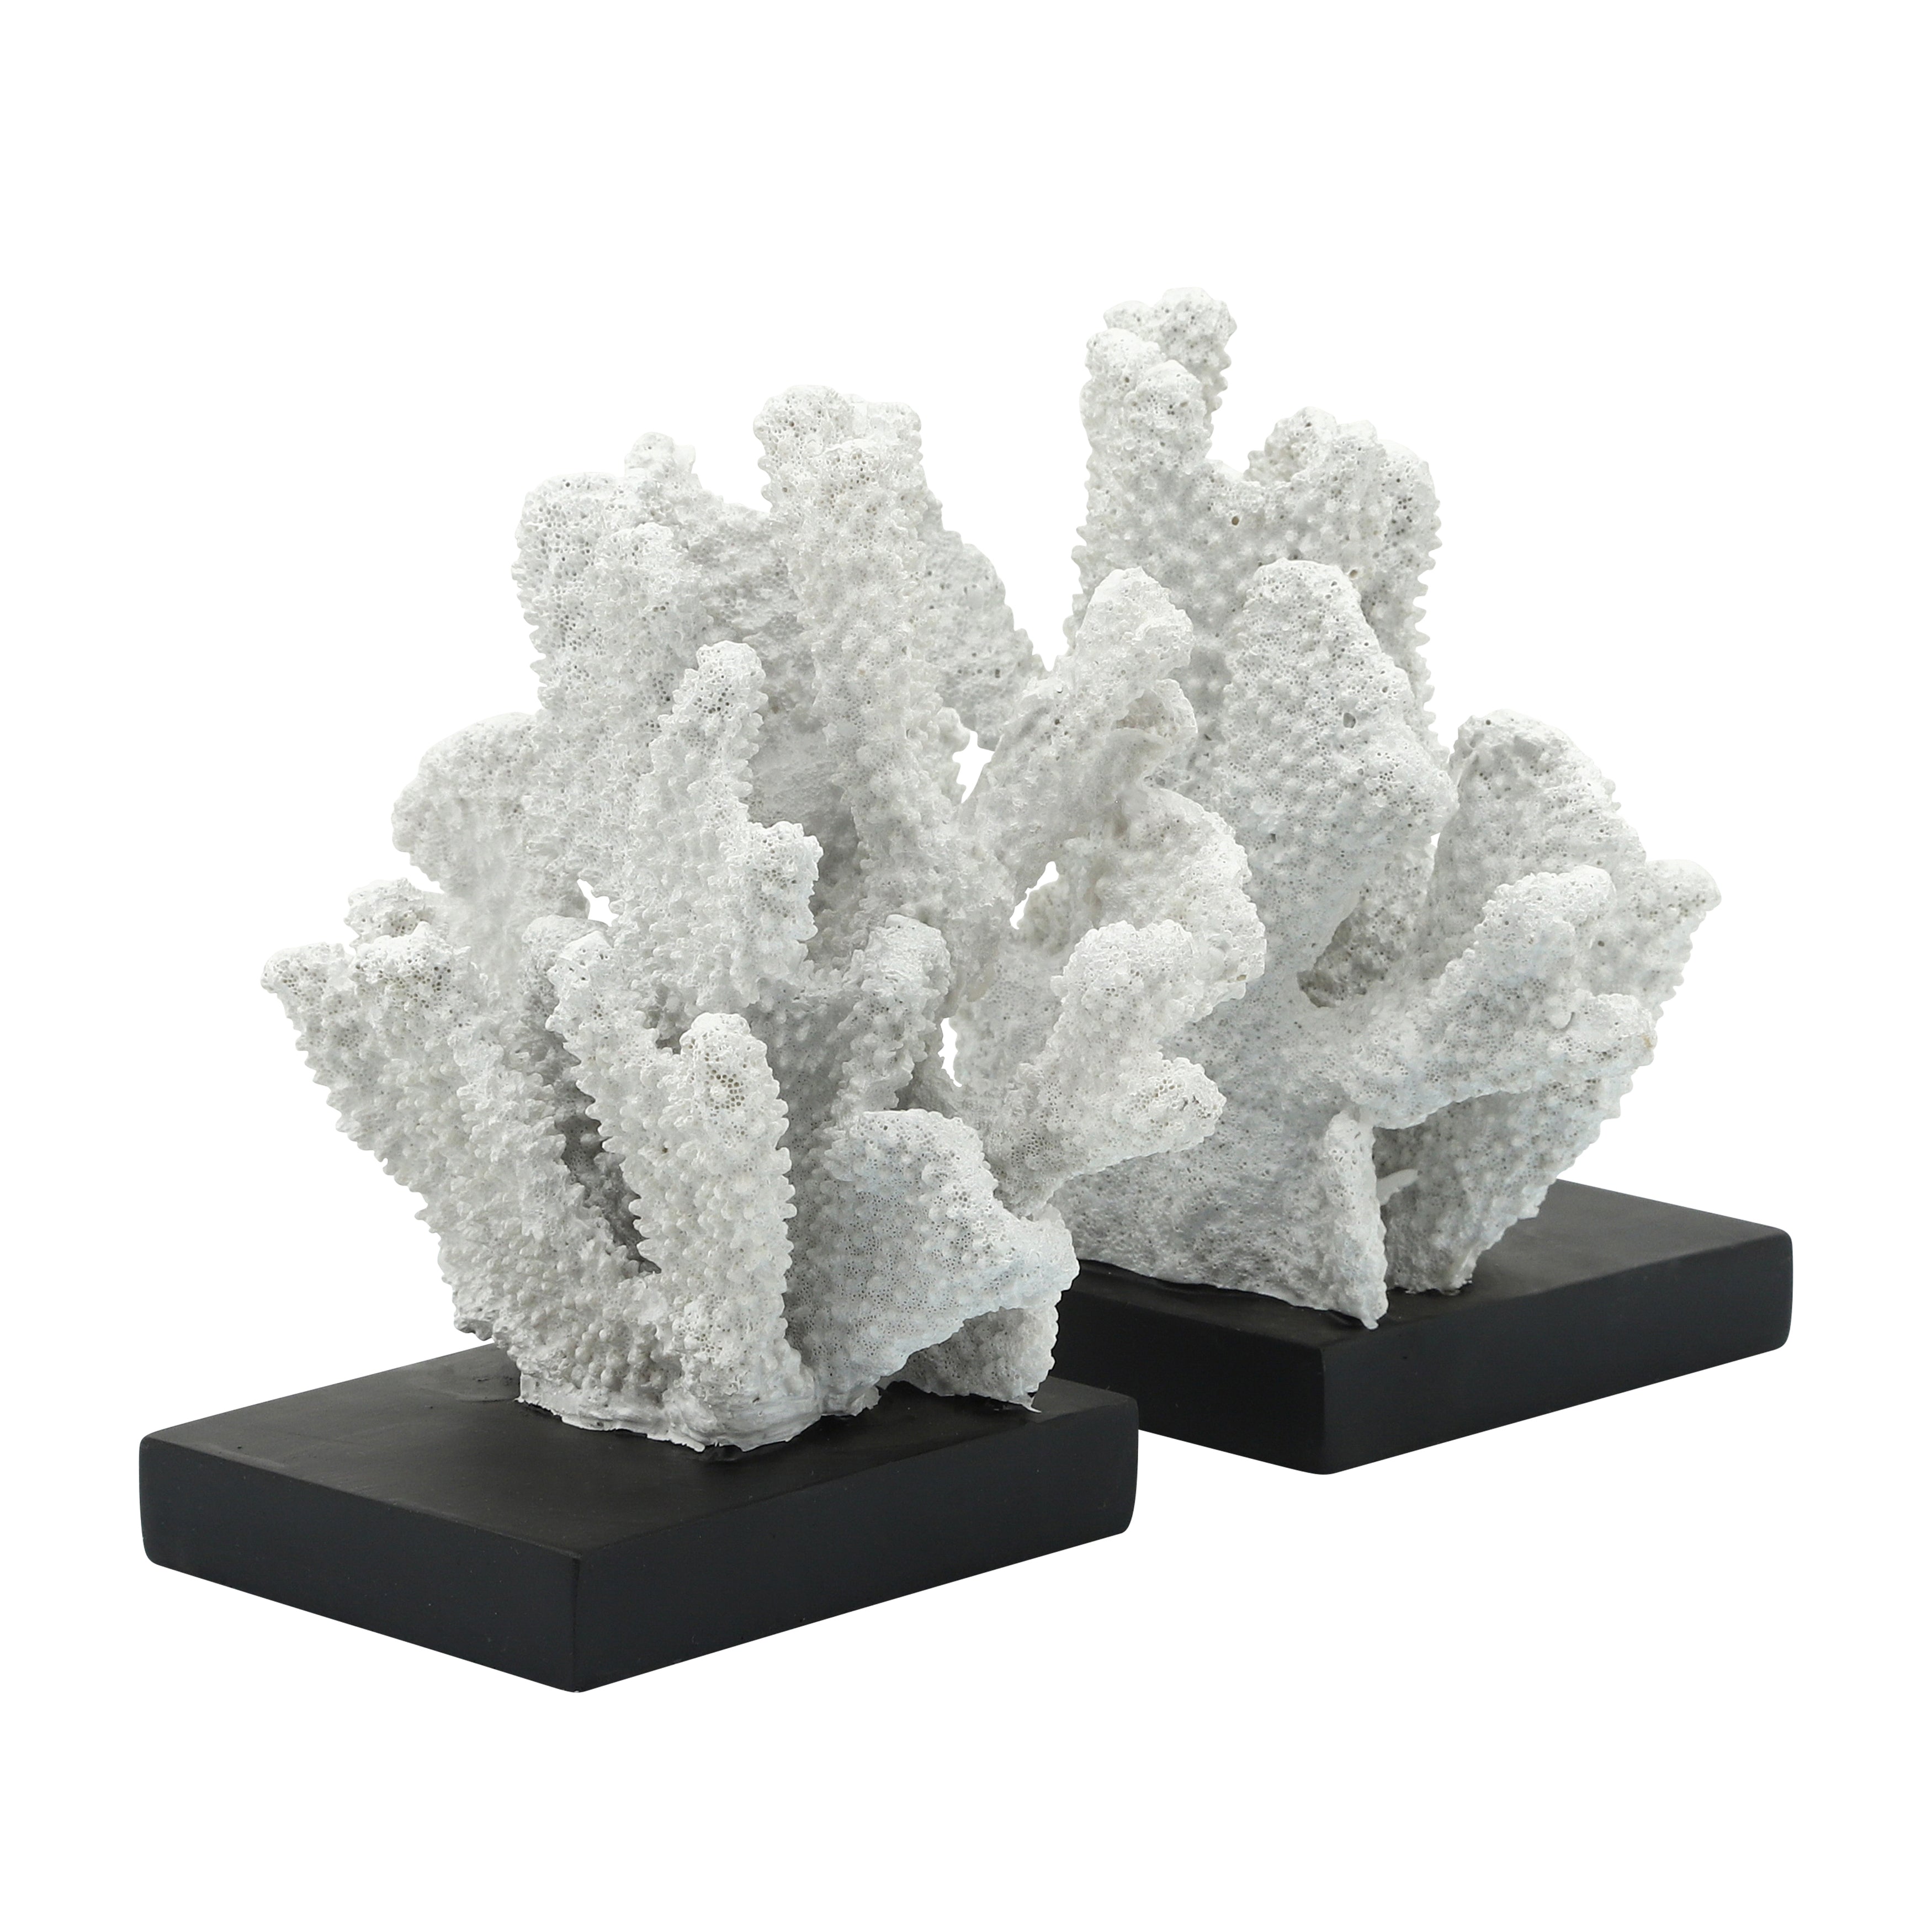 S/2 Polyresin 7"H Coral Bookends, White/Black